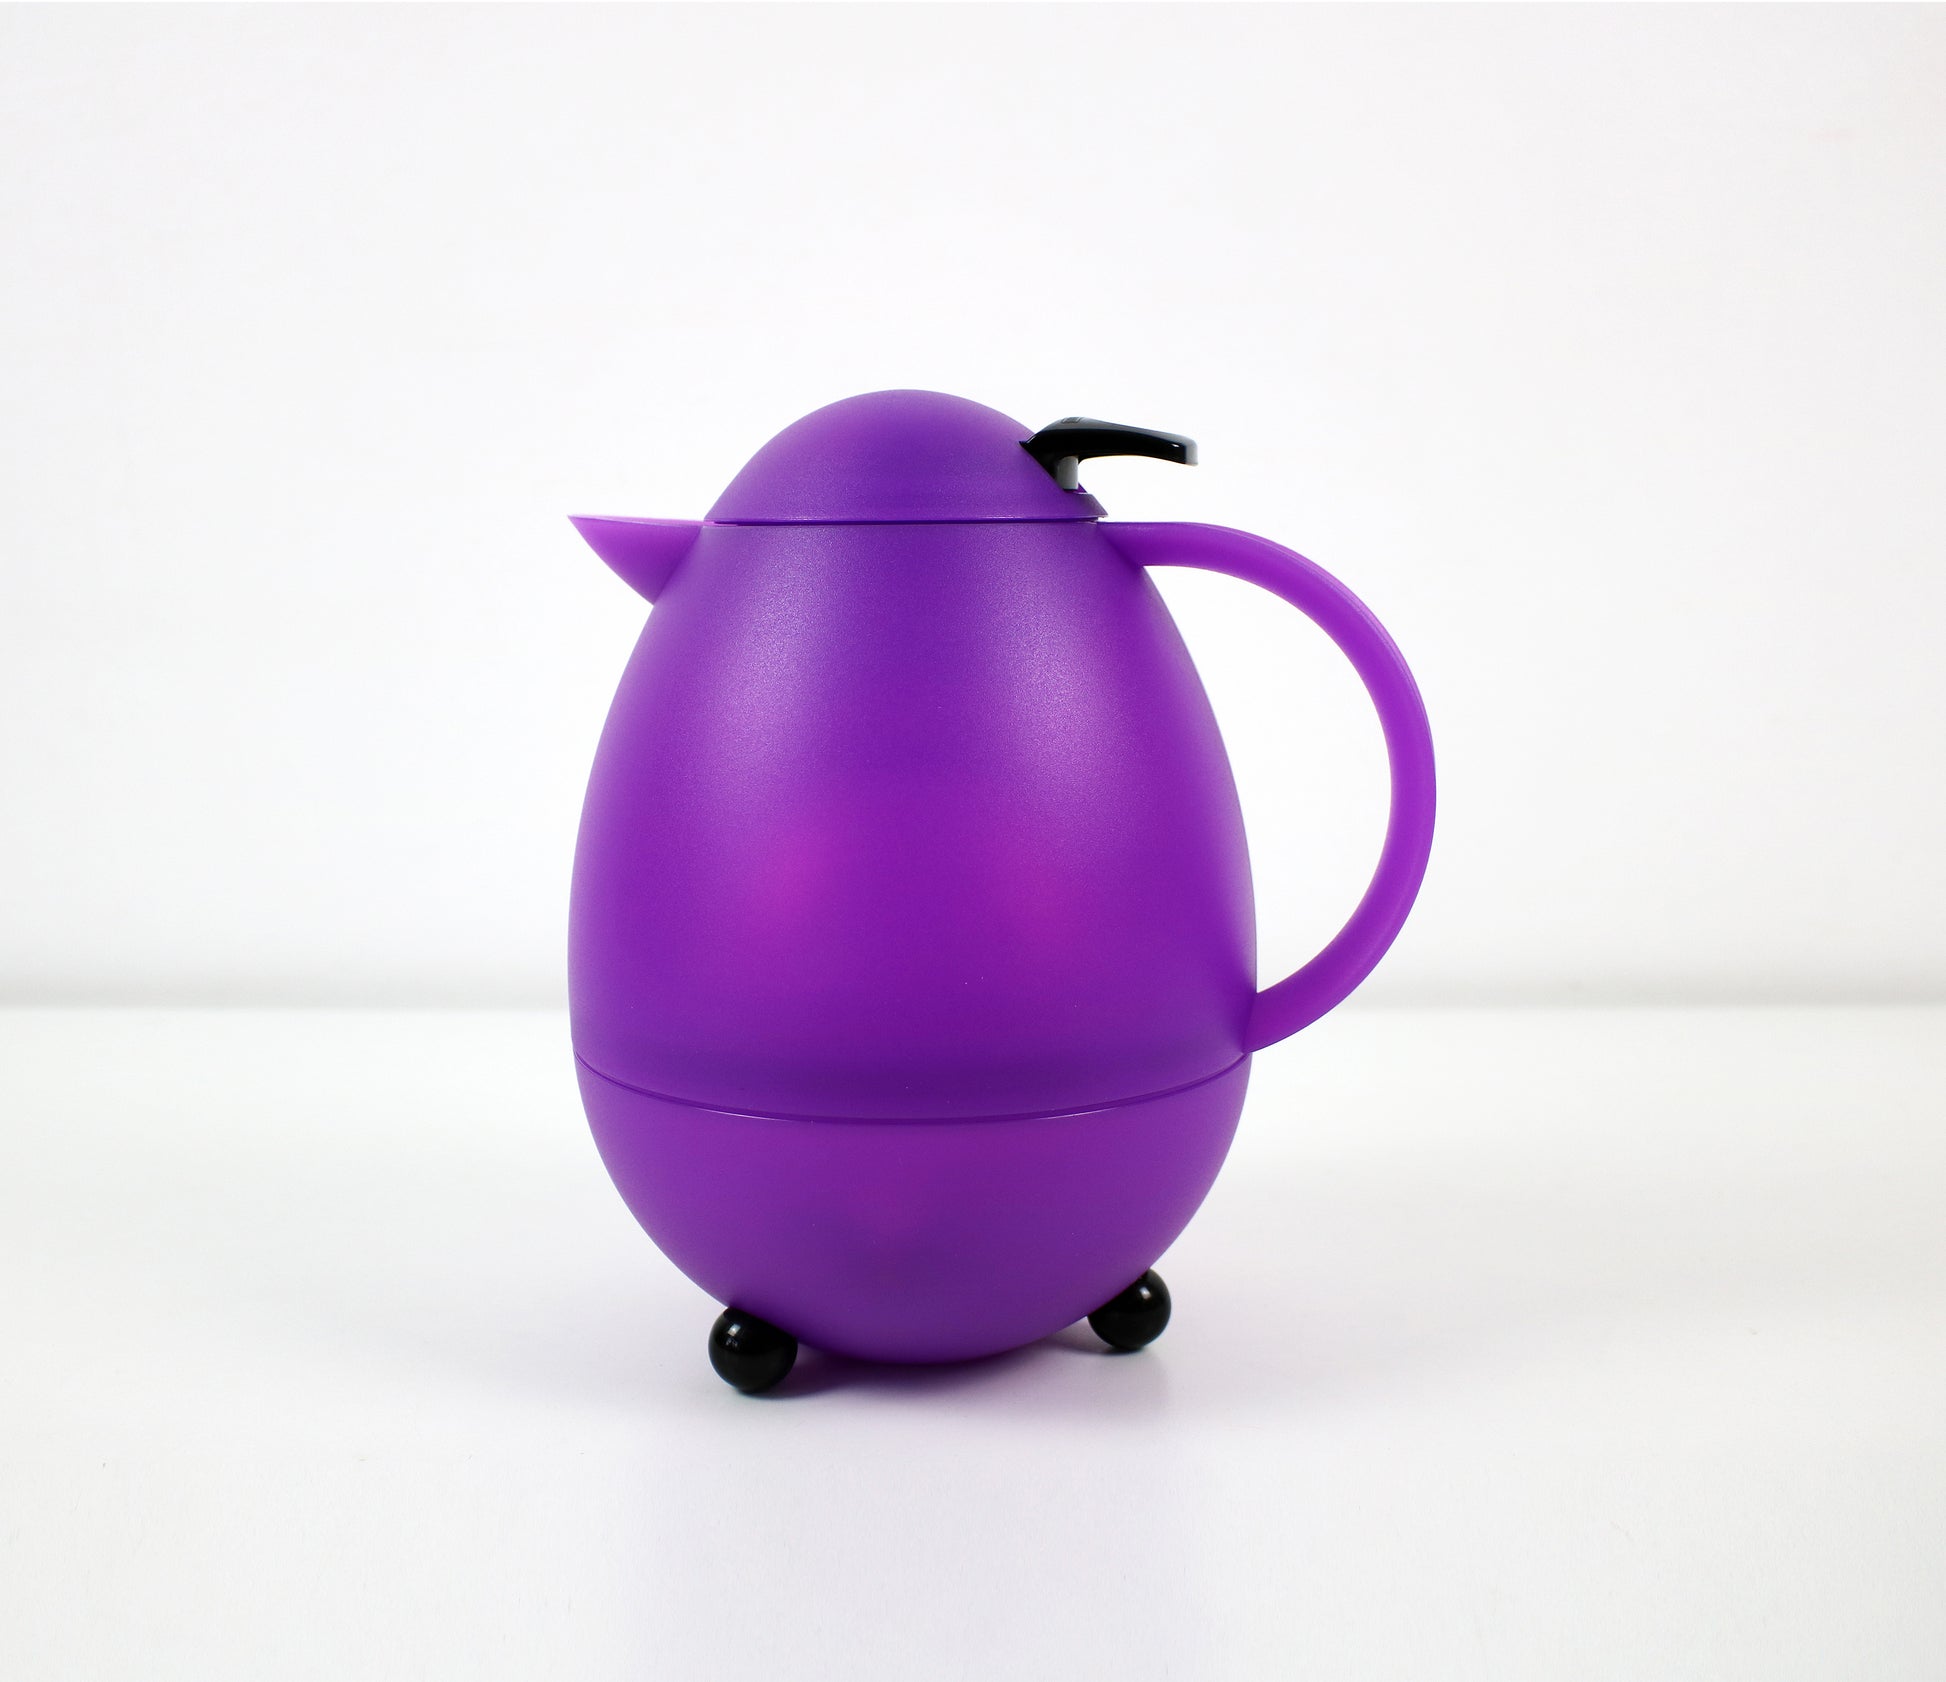 Hans Slany Memphis style jug in purple and black plastic for Leifheit Germany 1990s